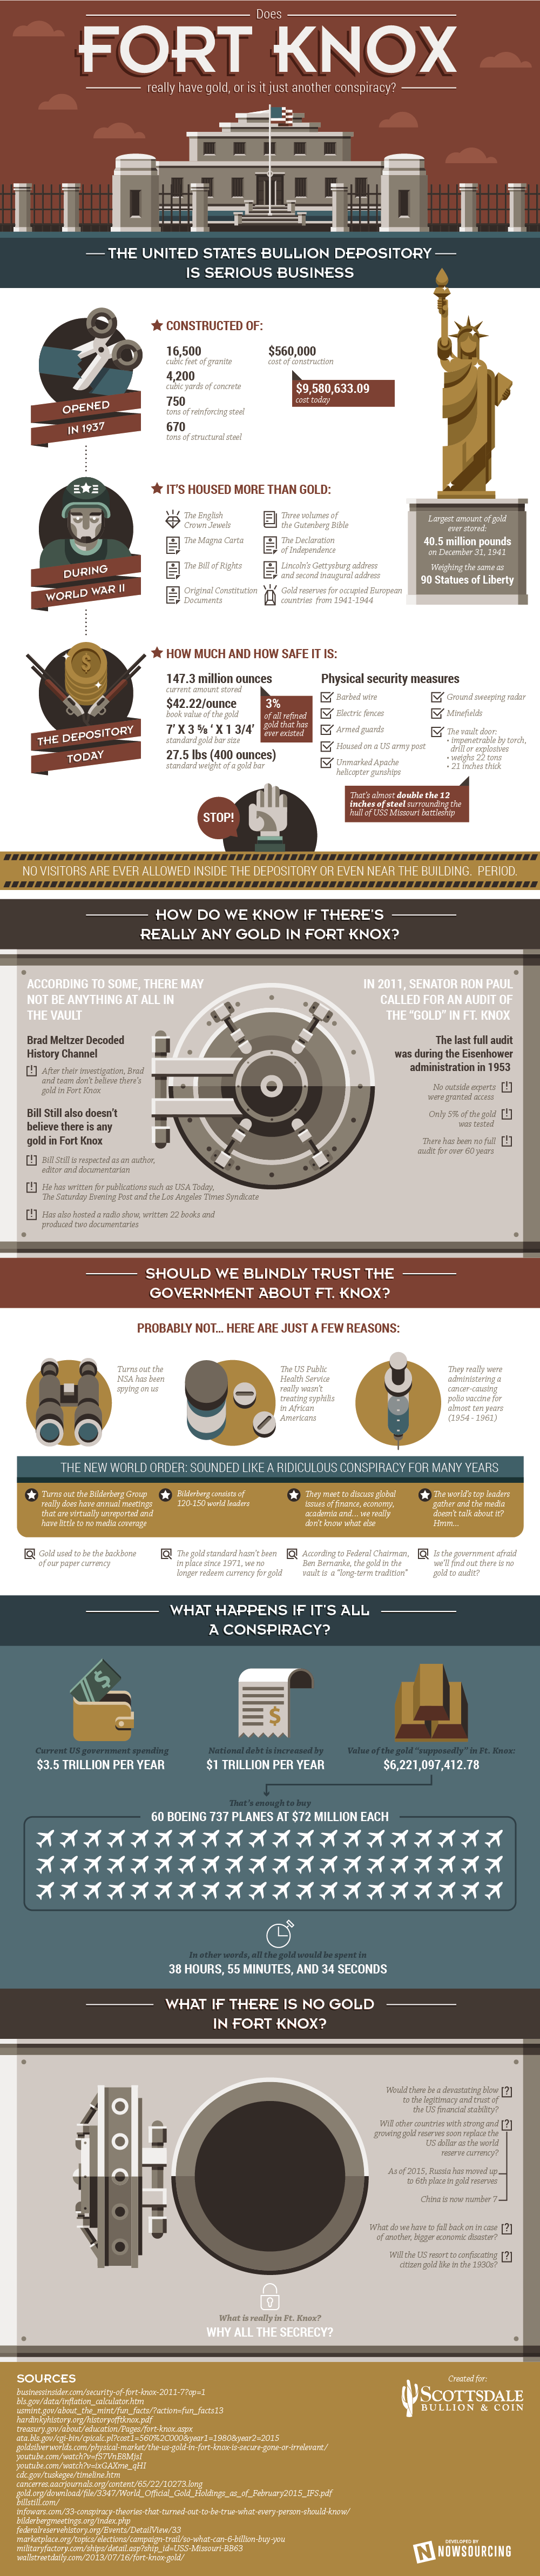 Does Fort Knox Really Have Gold? #infographic